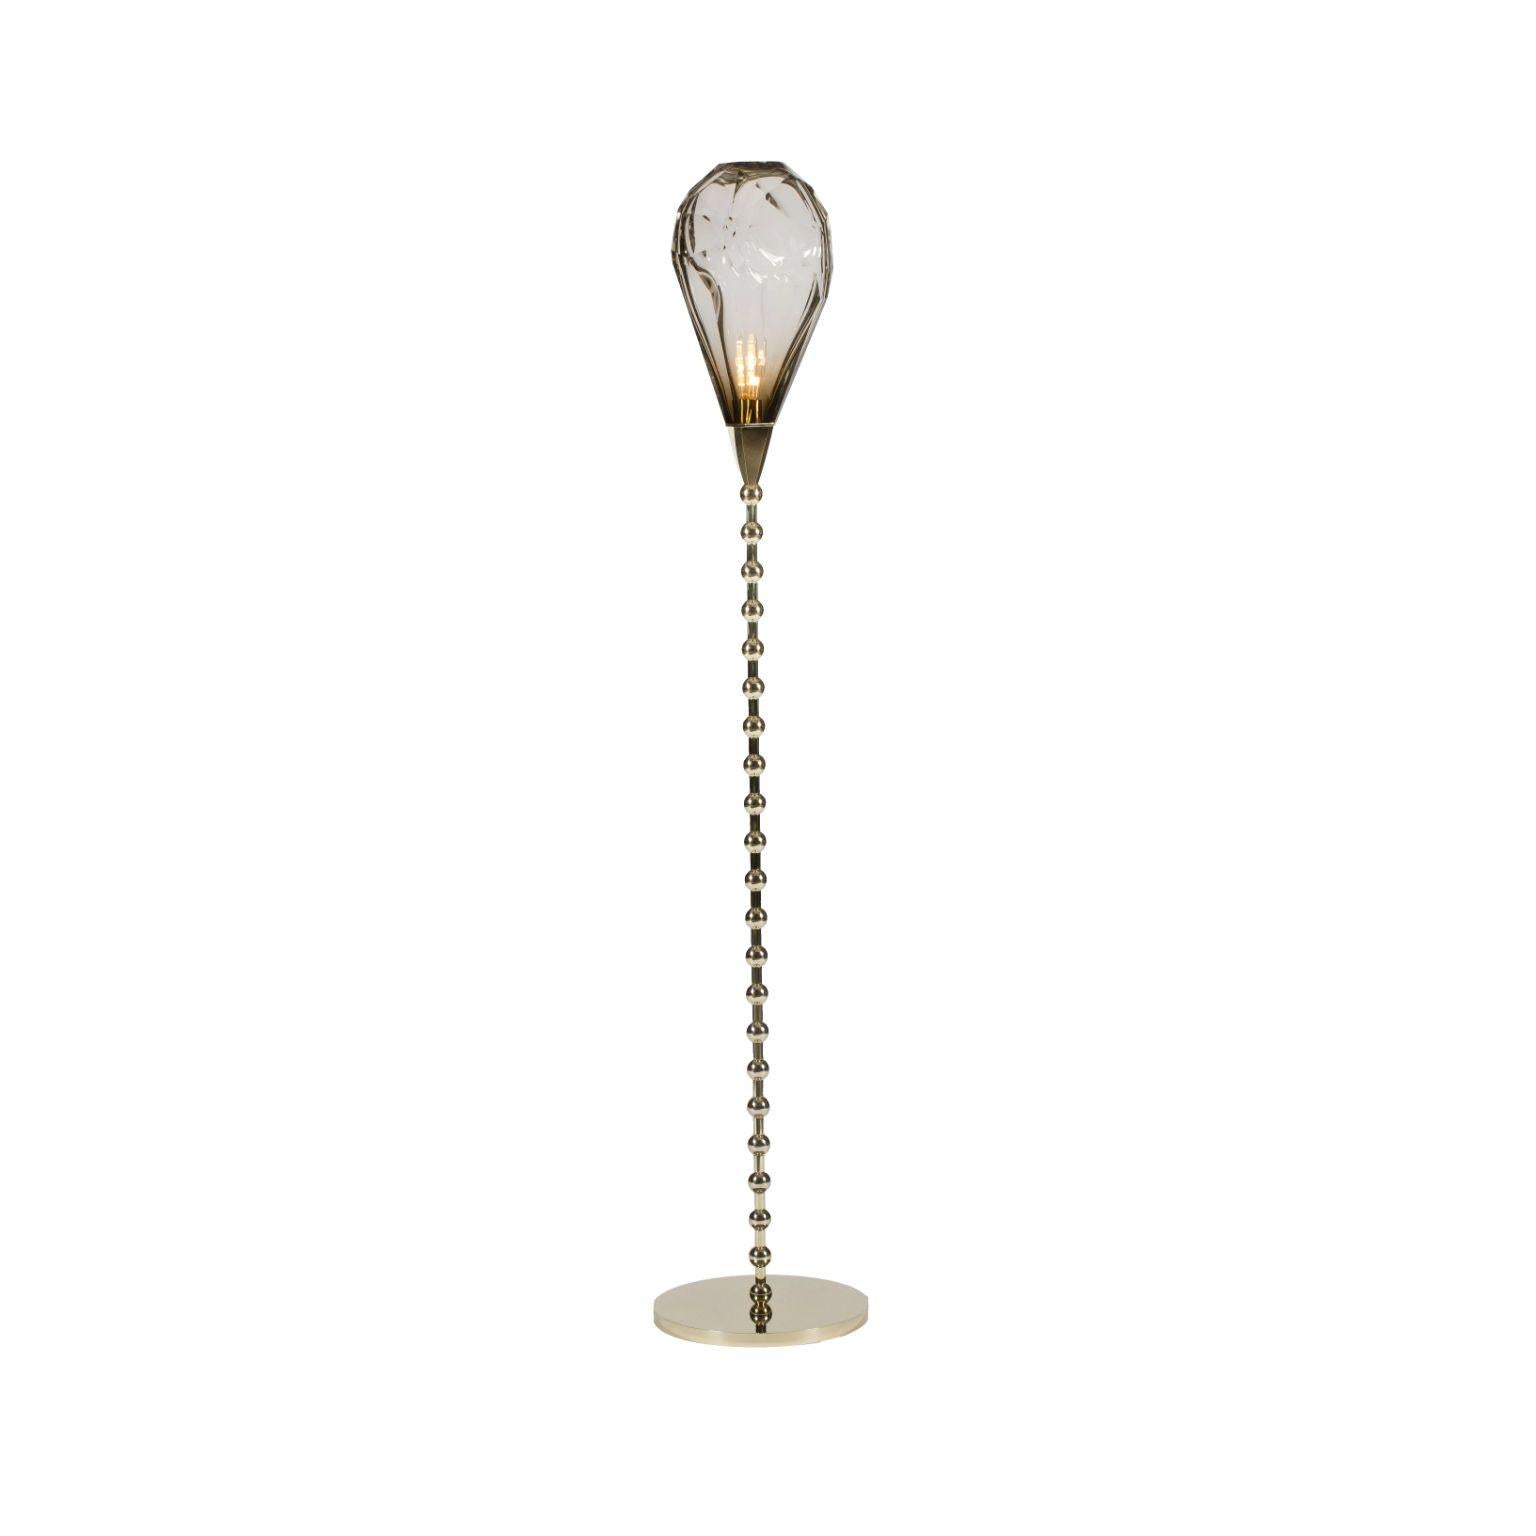 Adamas floor lamp by Emilie Lemardeley
Dimensions: D30 x H160 cm
Materials: Brass, Glass
Weight: 35 kg

The ADAMAS lightings take their inspiration from Greek myth; the story of a young man transformed into a precious stone, a diamond, by the